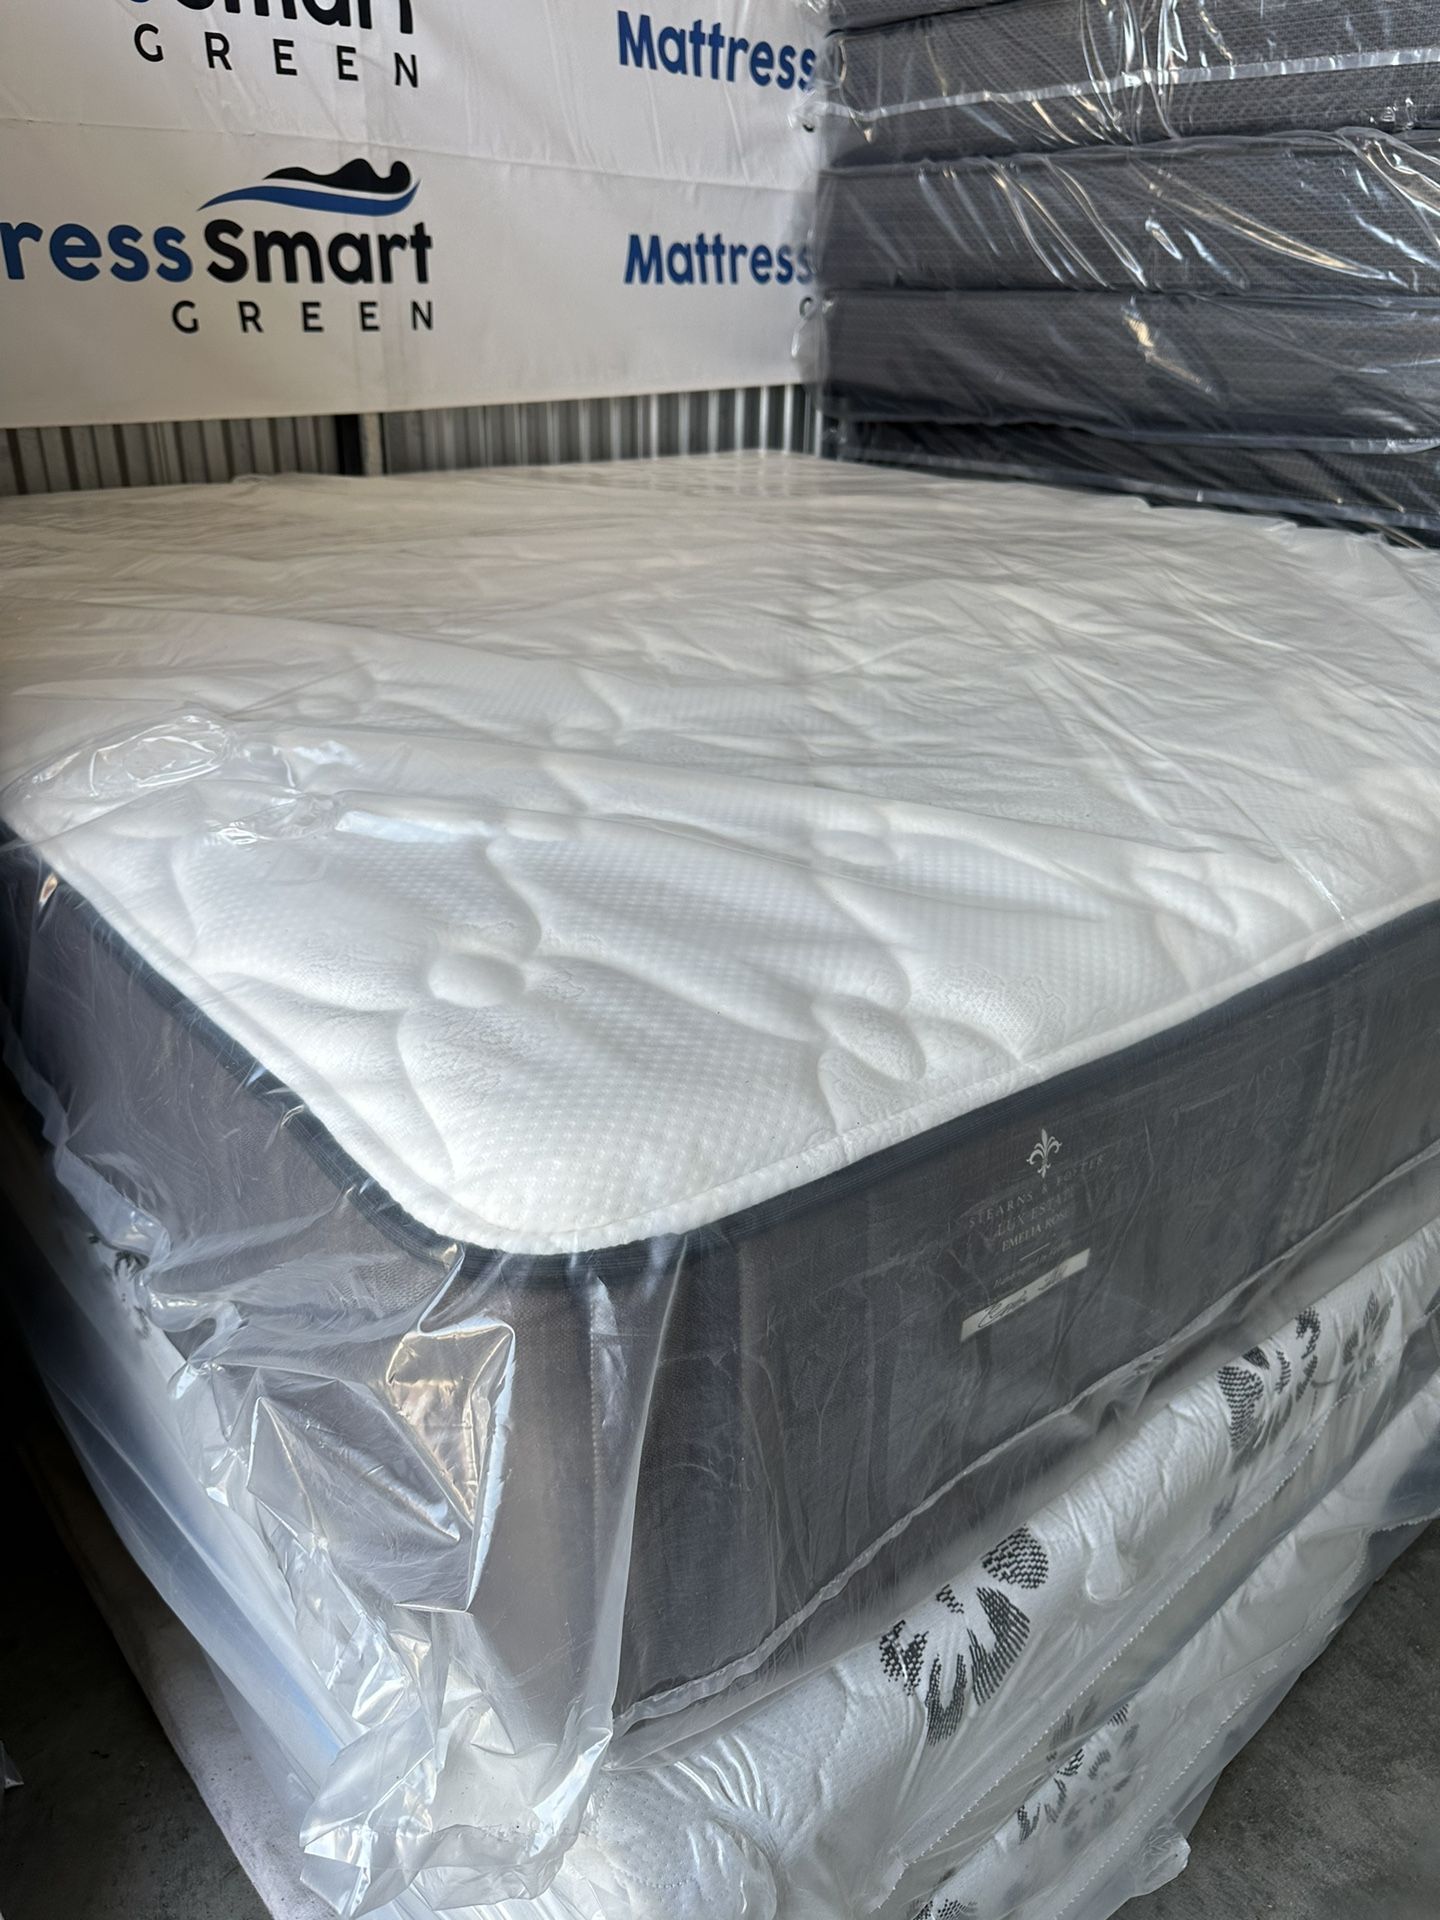 King Mattress Stearns And Foster LUX ESTATE Emelia Rose Special Offers $999 Available Queen Sizes 